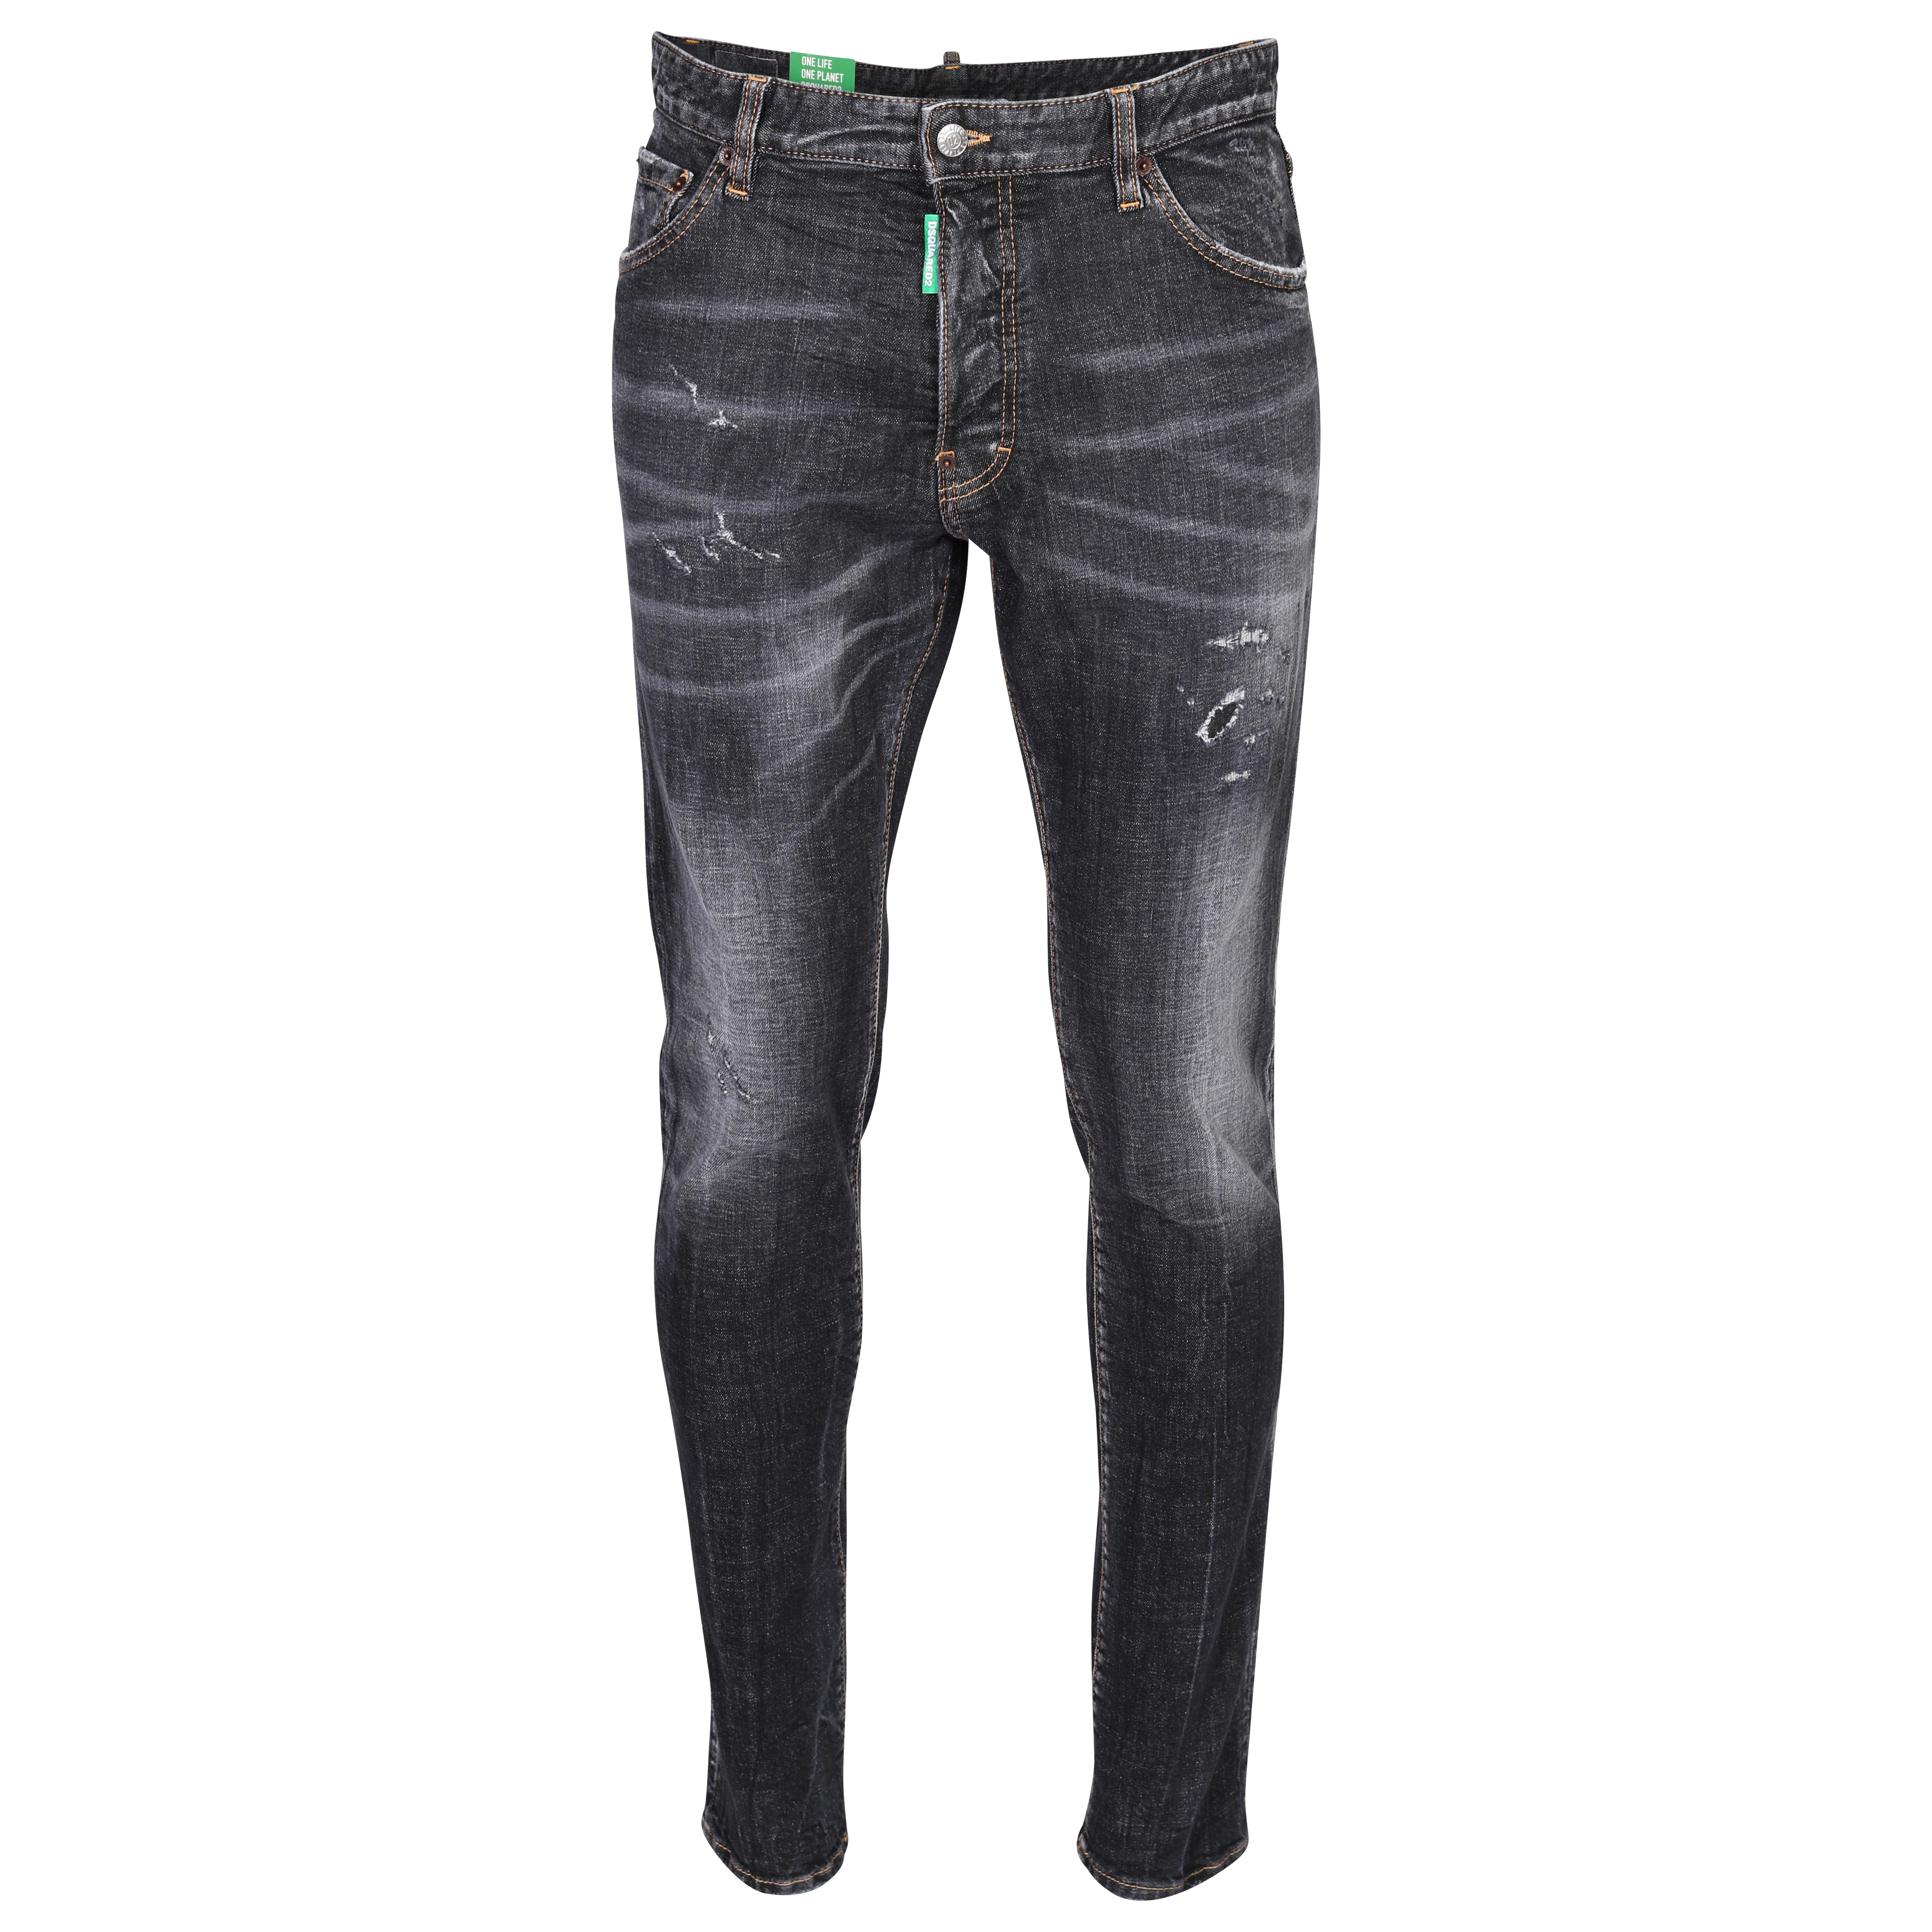 DSQUARED2 Green Label Cool Guy Jeans in Washed Black